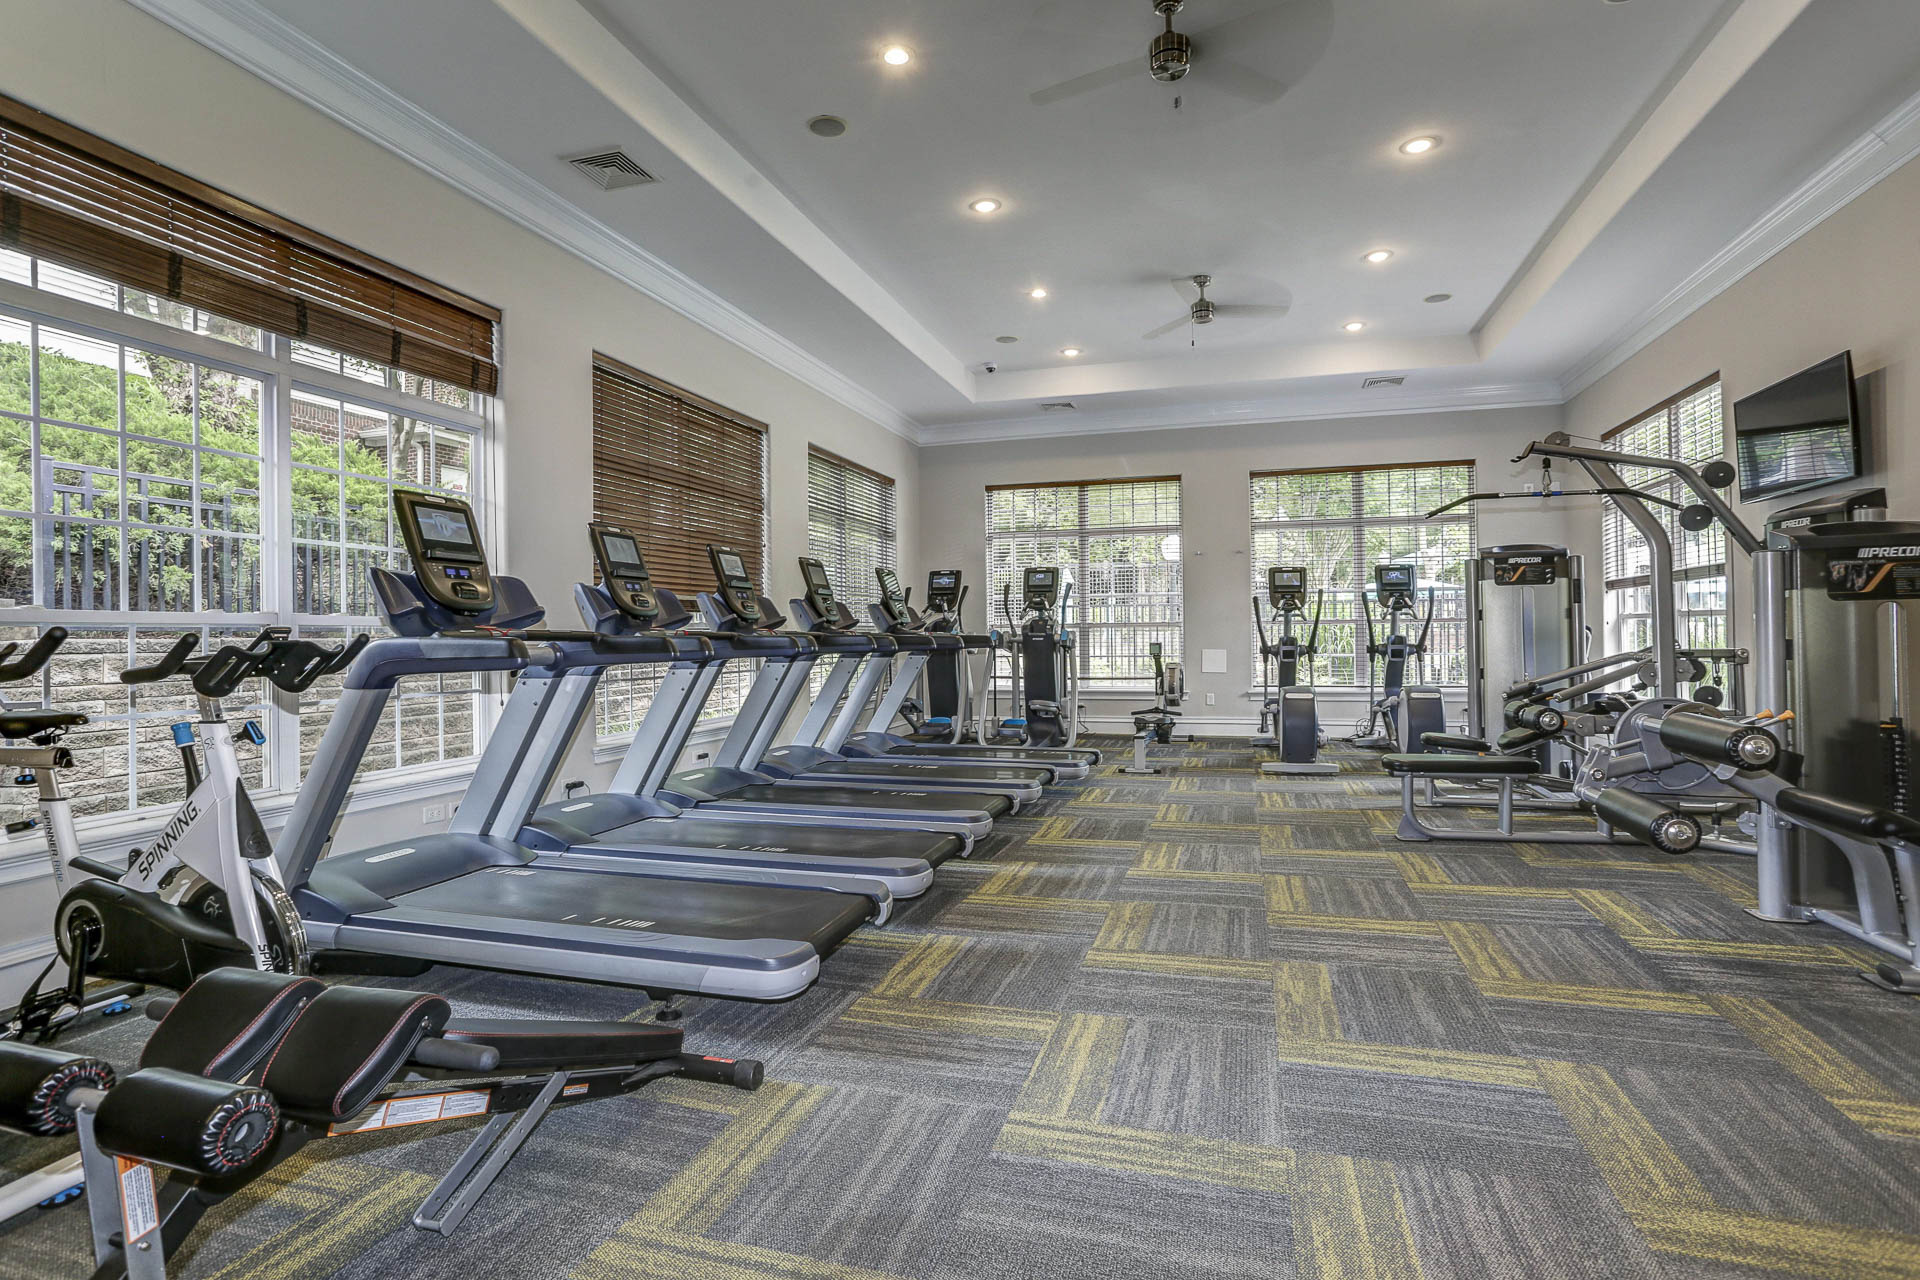 15_Furnished_Apartments_Finley_Fitness.jpg